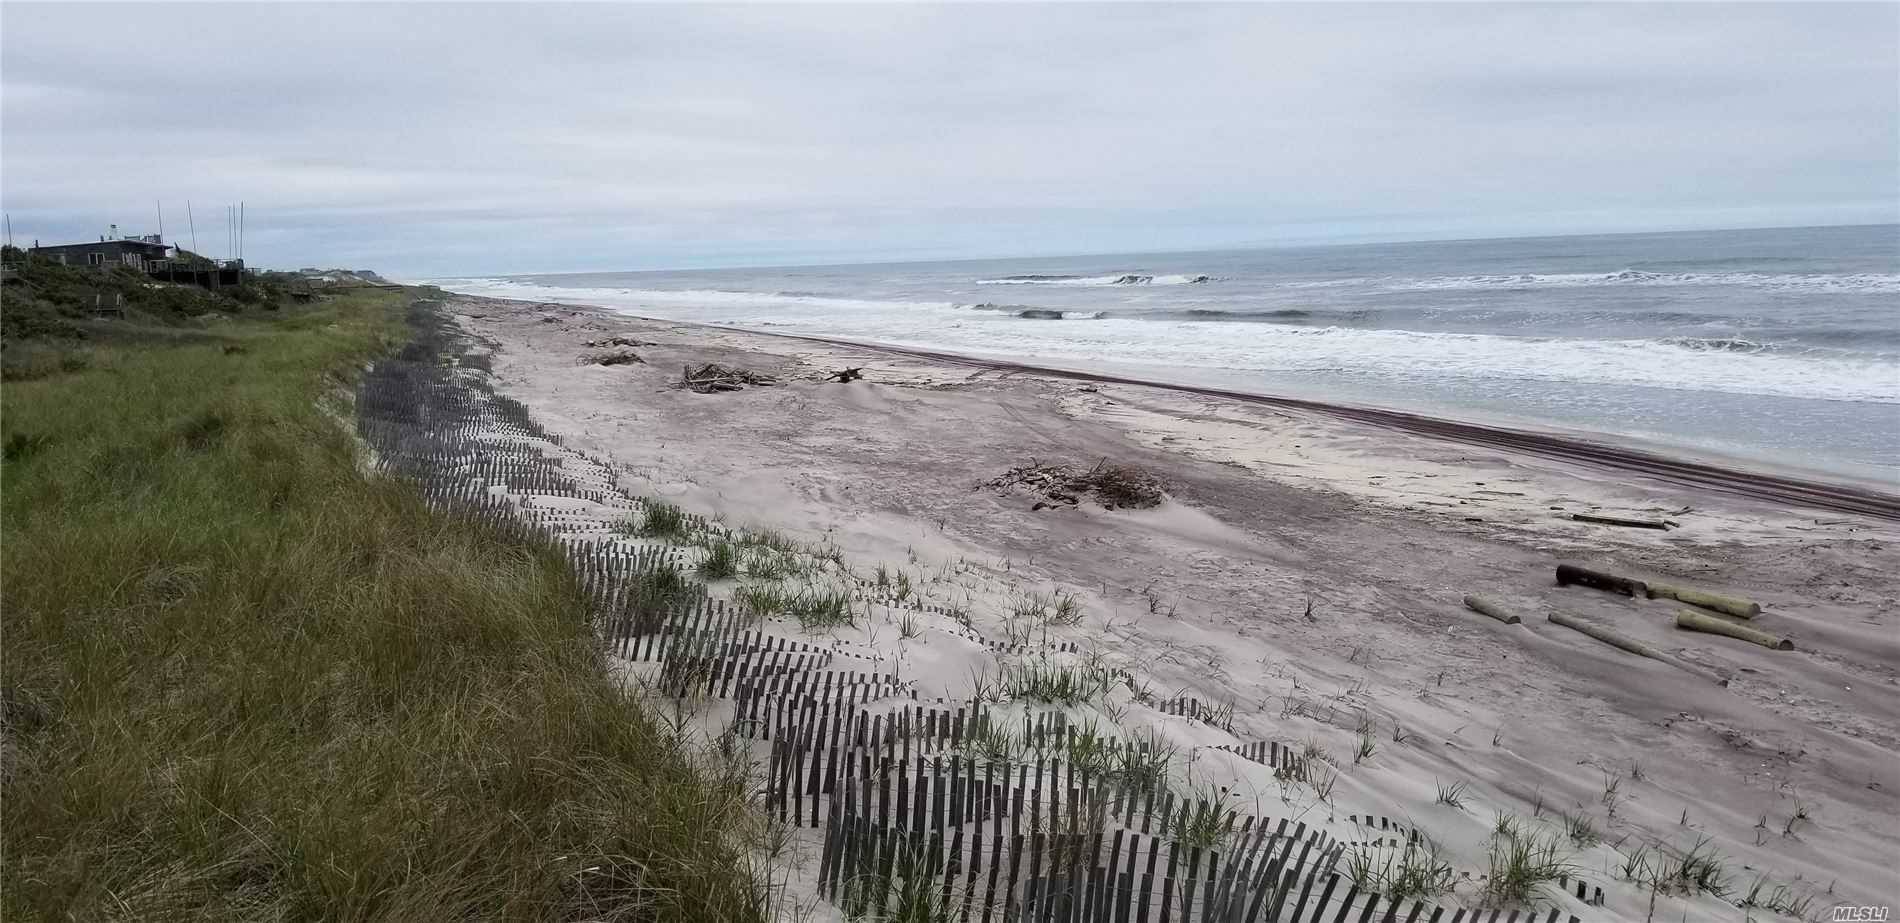 Direct Oceanfront Build able Residential Lot located in the east end of Cherry Grove, a corner property that would accommodate the beach house of your dreams raw lot, so the ...